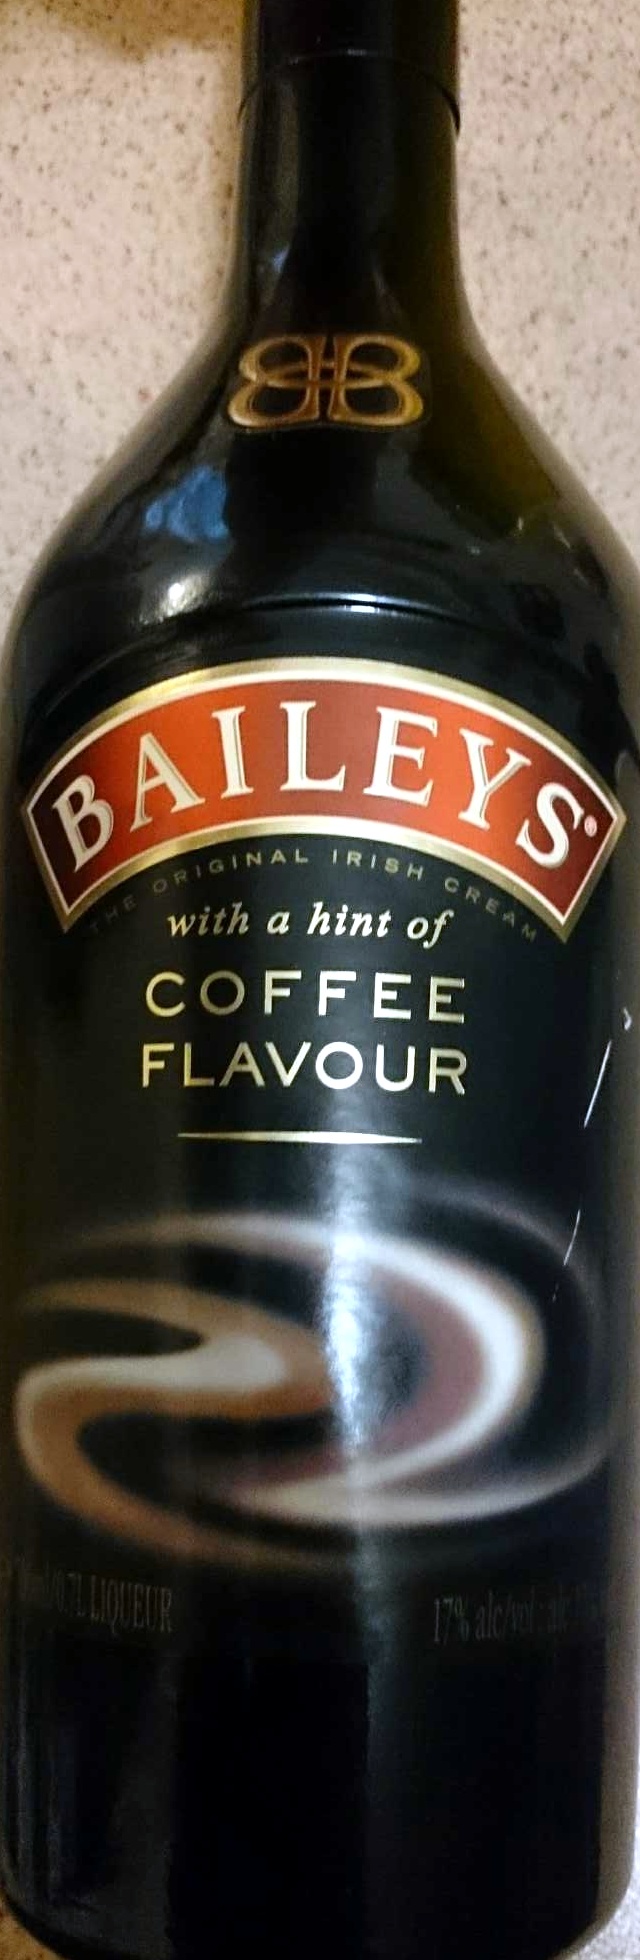 Baileys with a hint of Coffee Flavour - Product